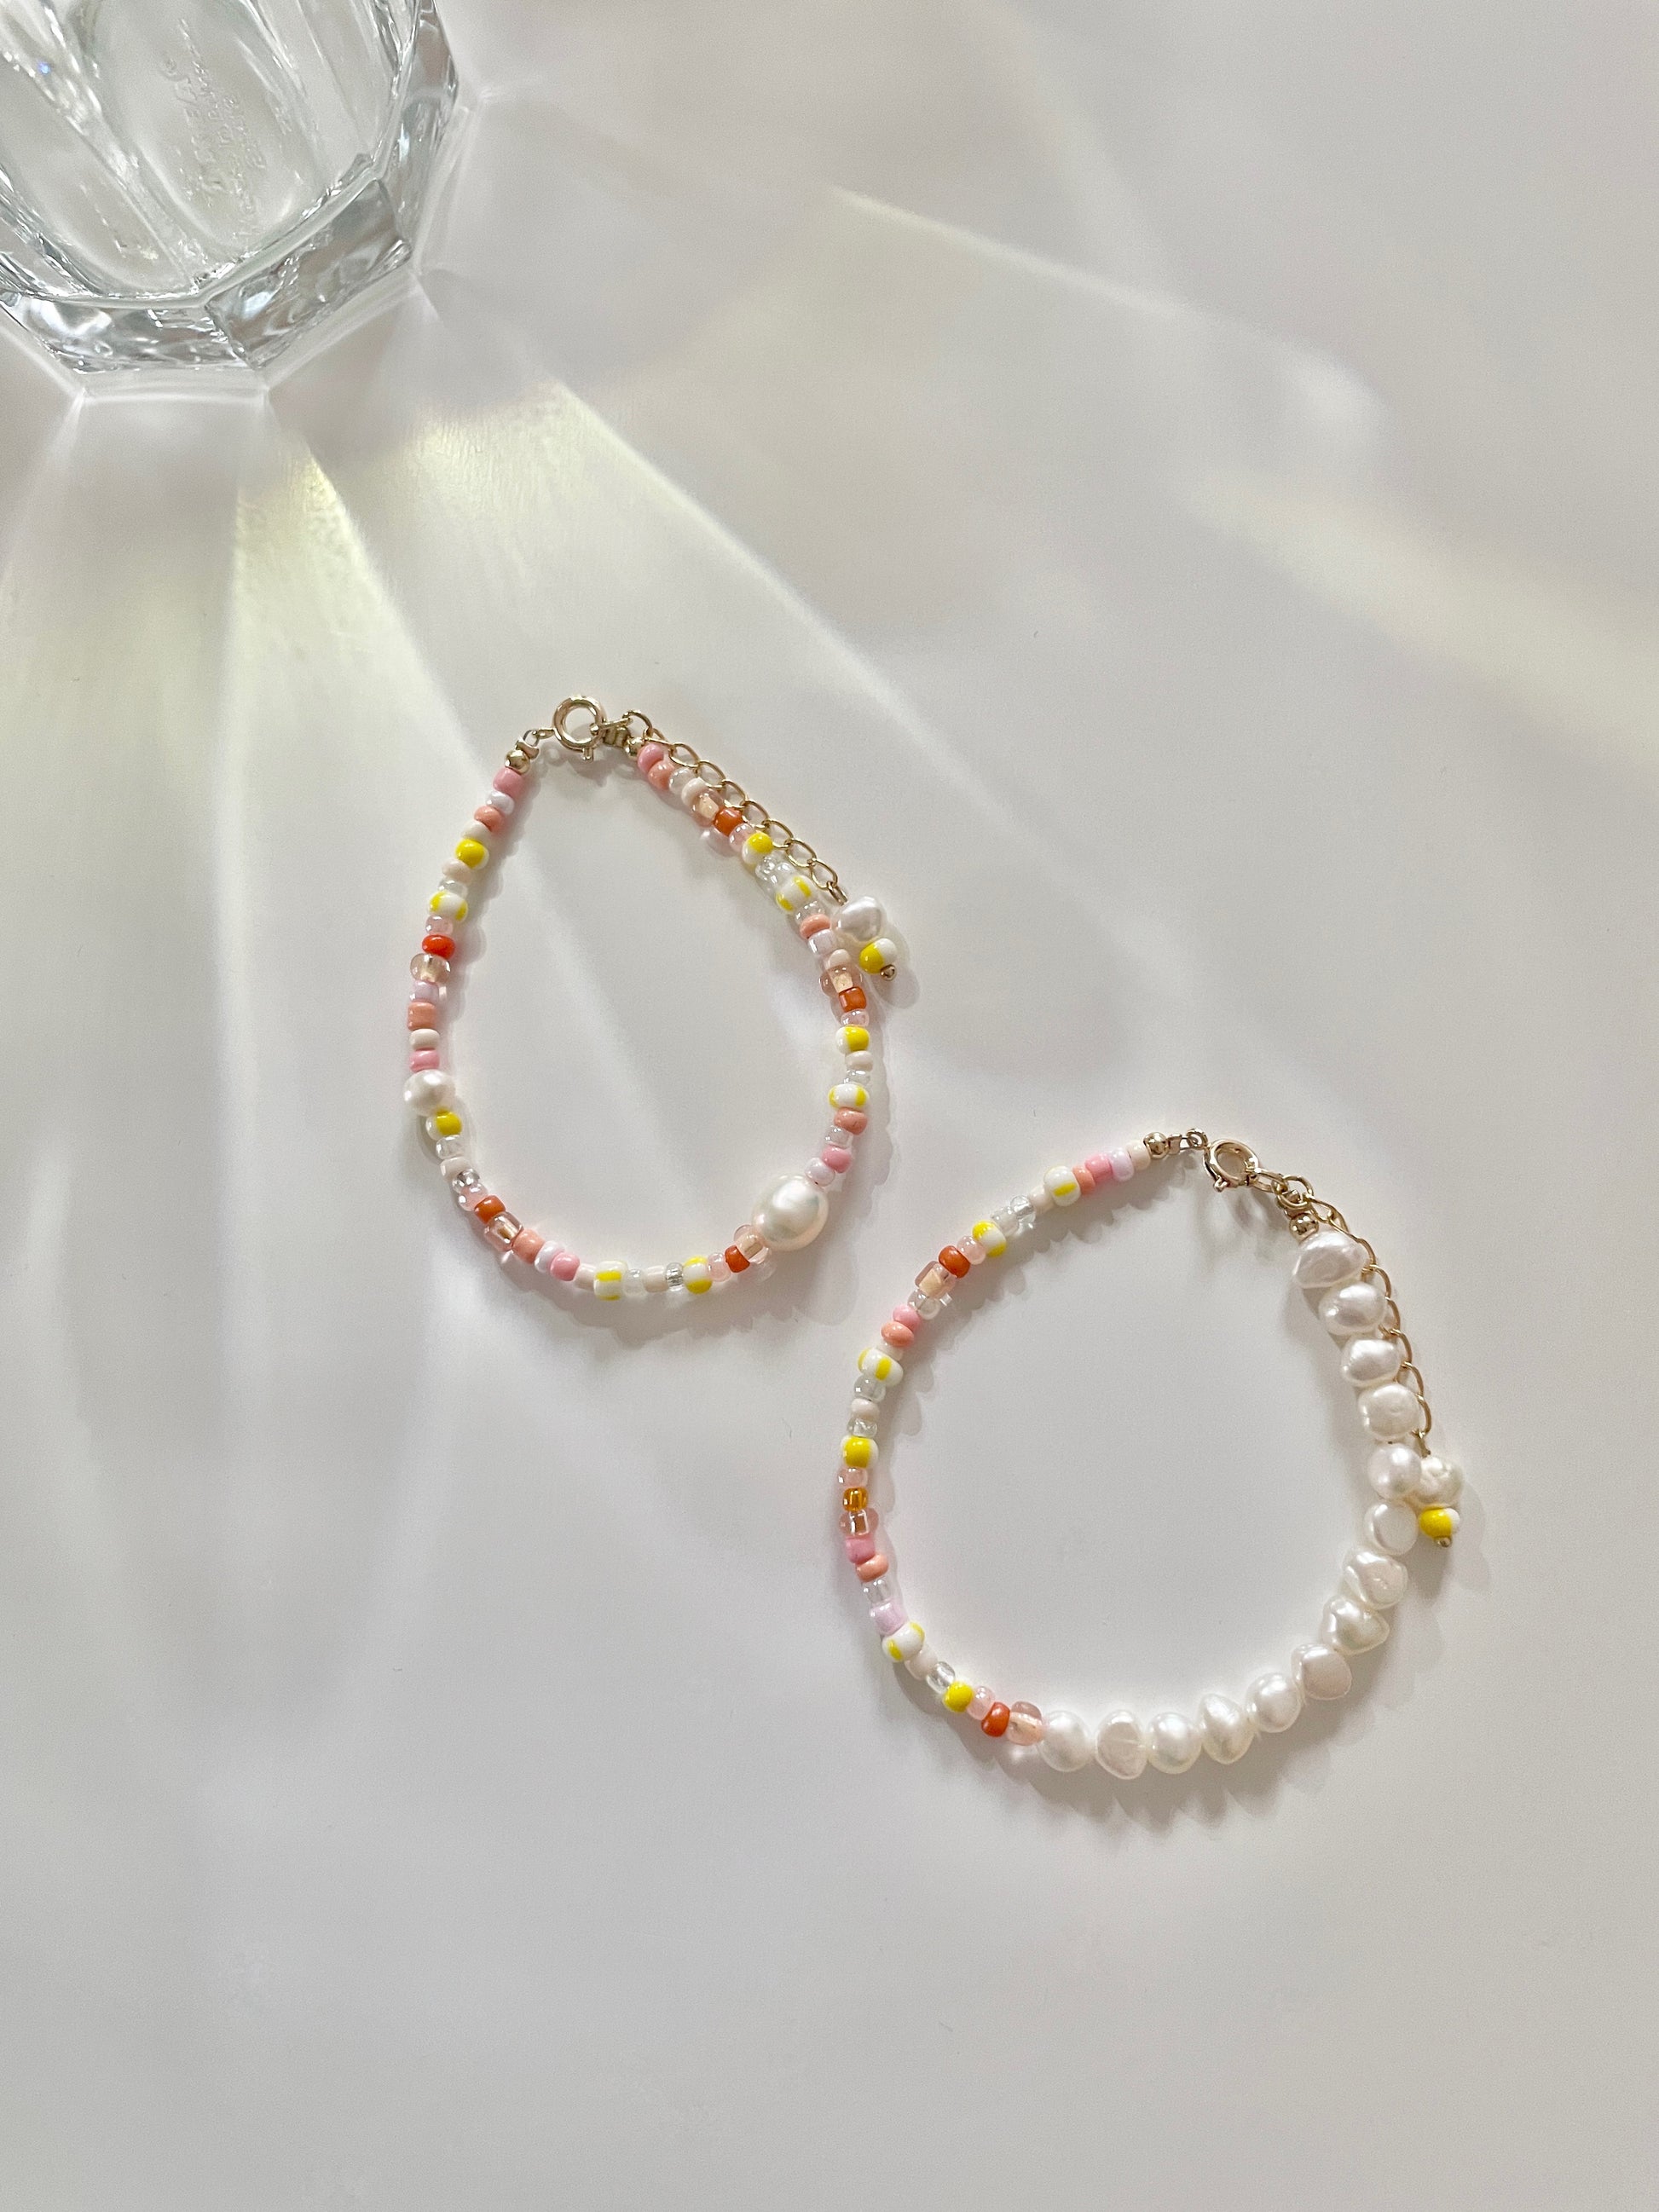 4ever young - FLOWERS OF SPRING Bracelets